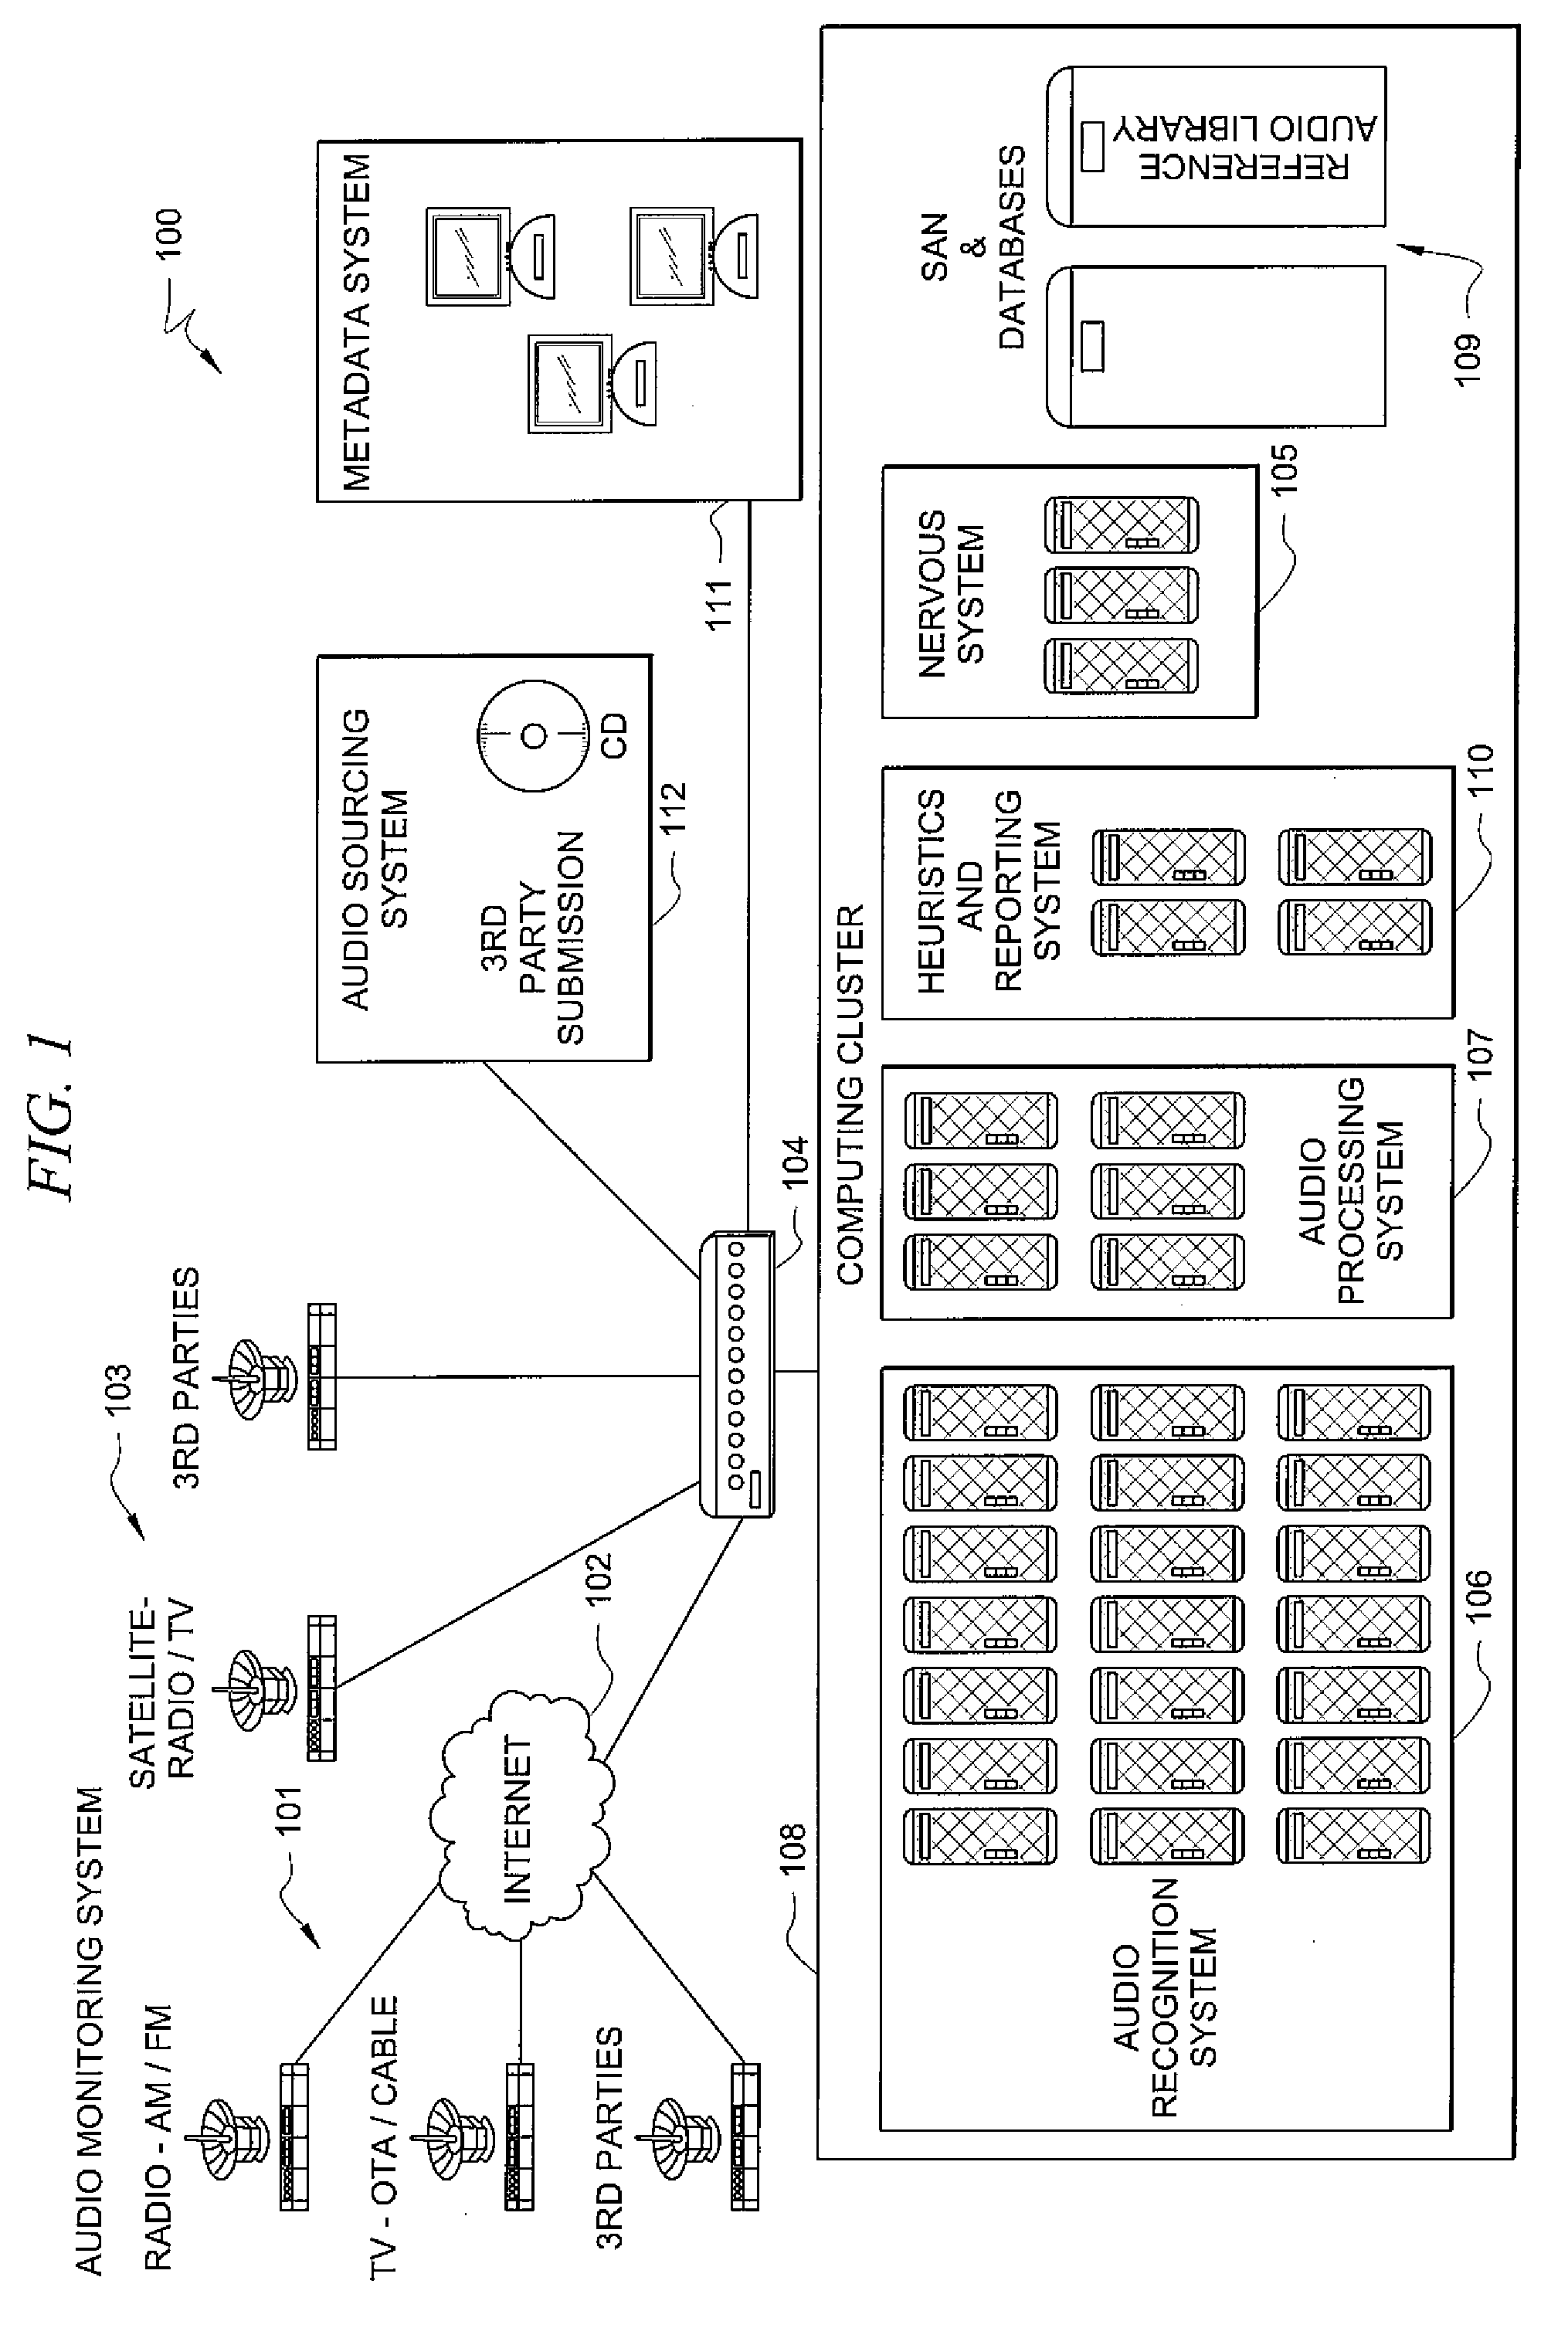 System and method for monitoring and recognizing broadcast data